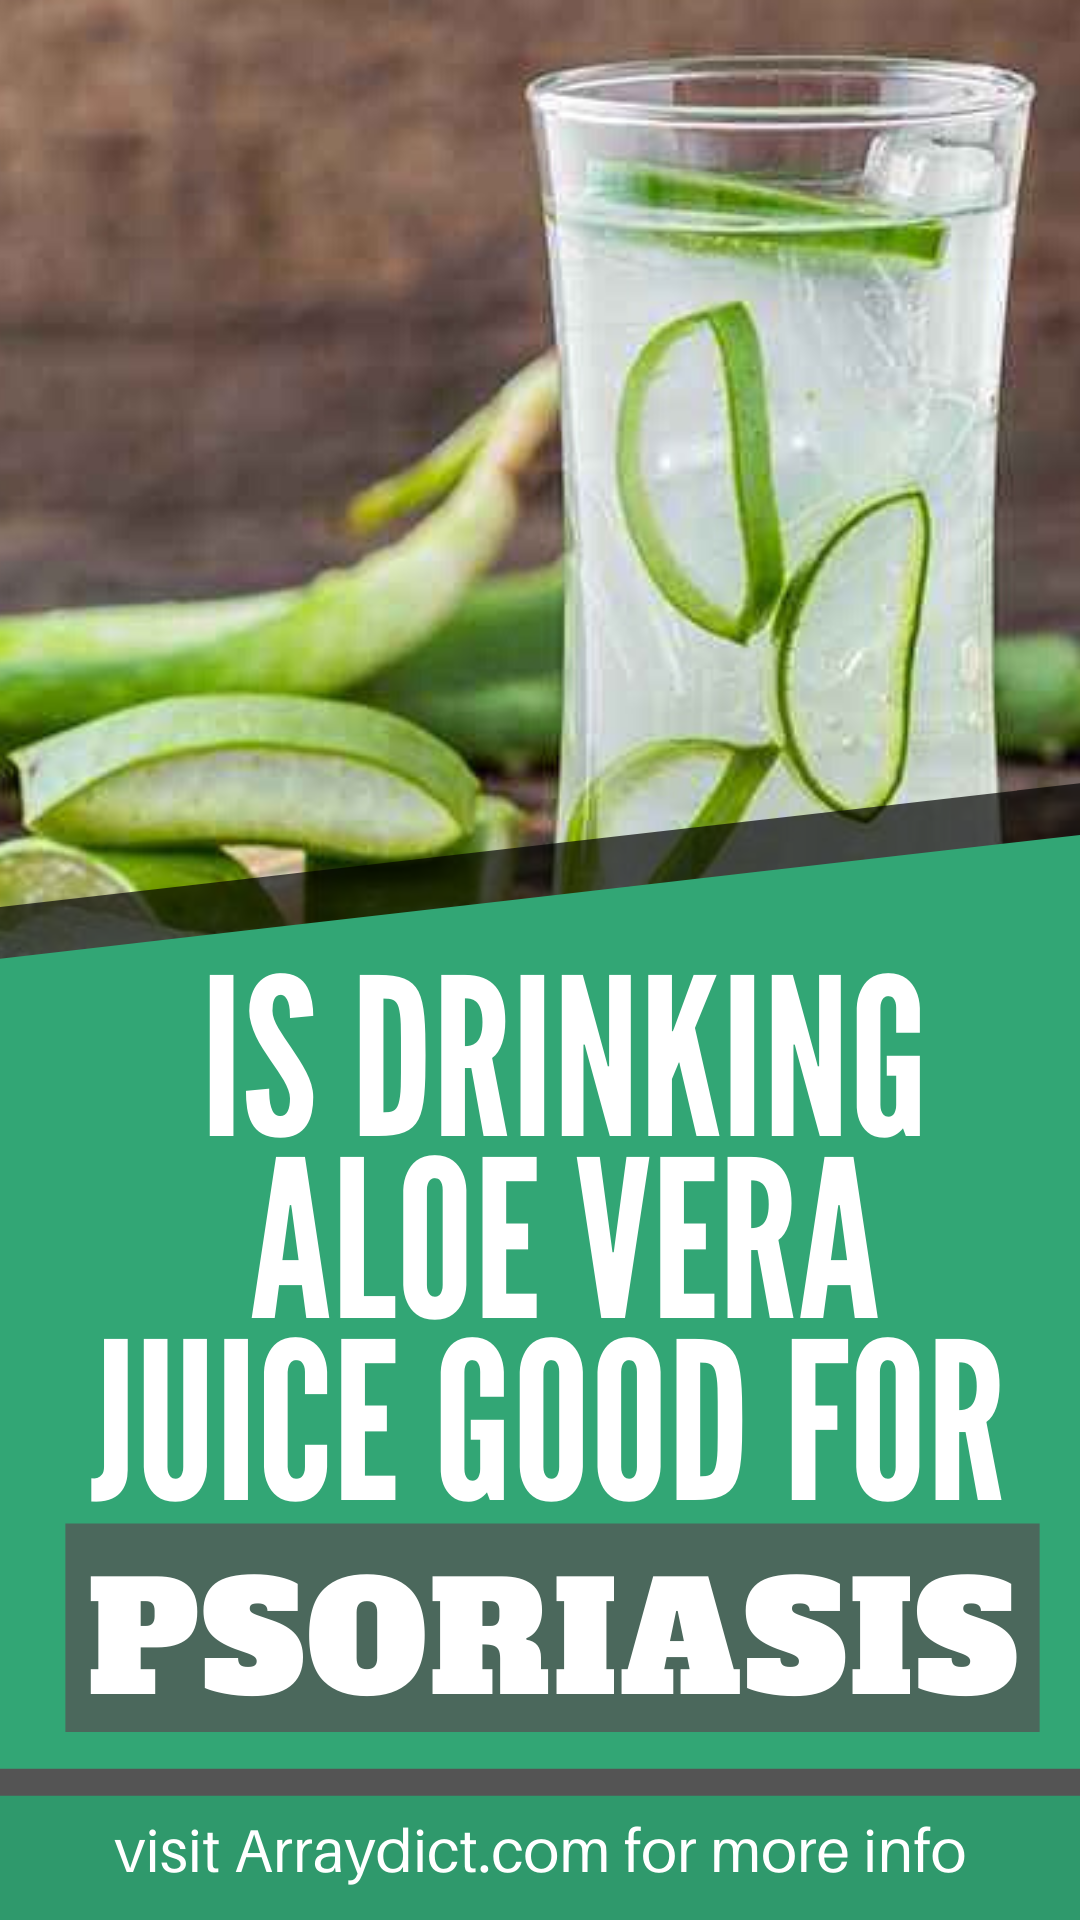 Is Pure Aloe Vera Really Good for Psoriasis?